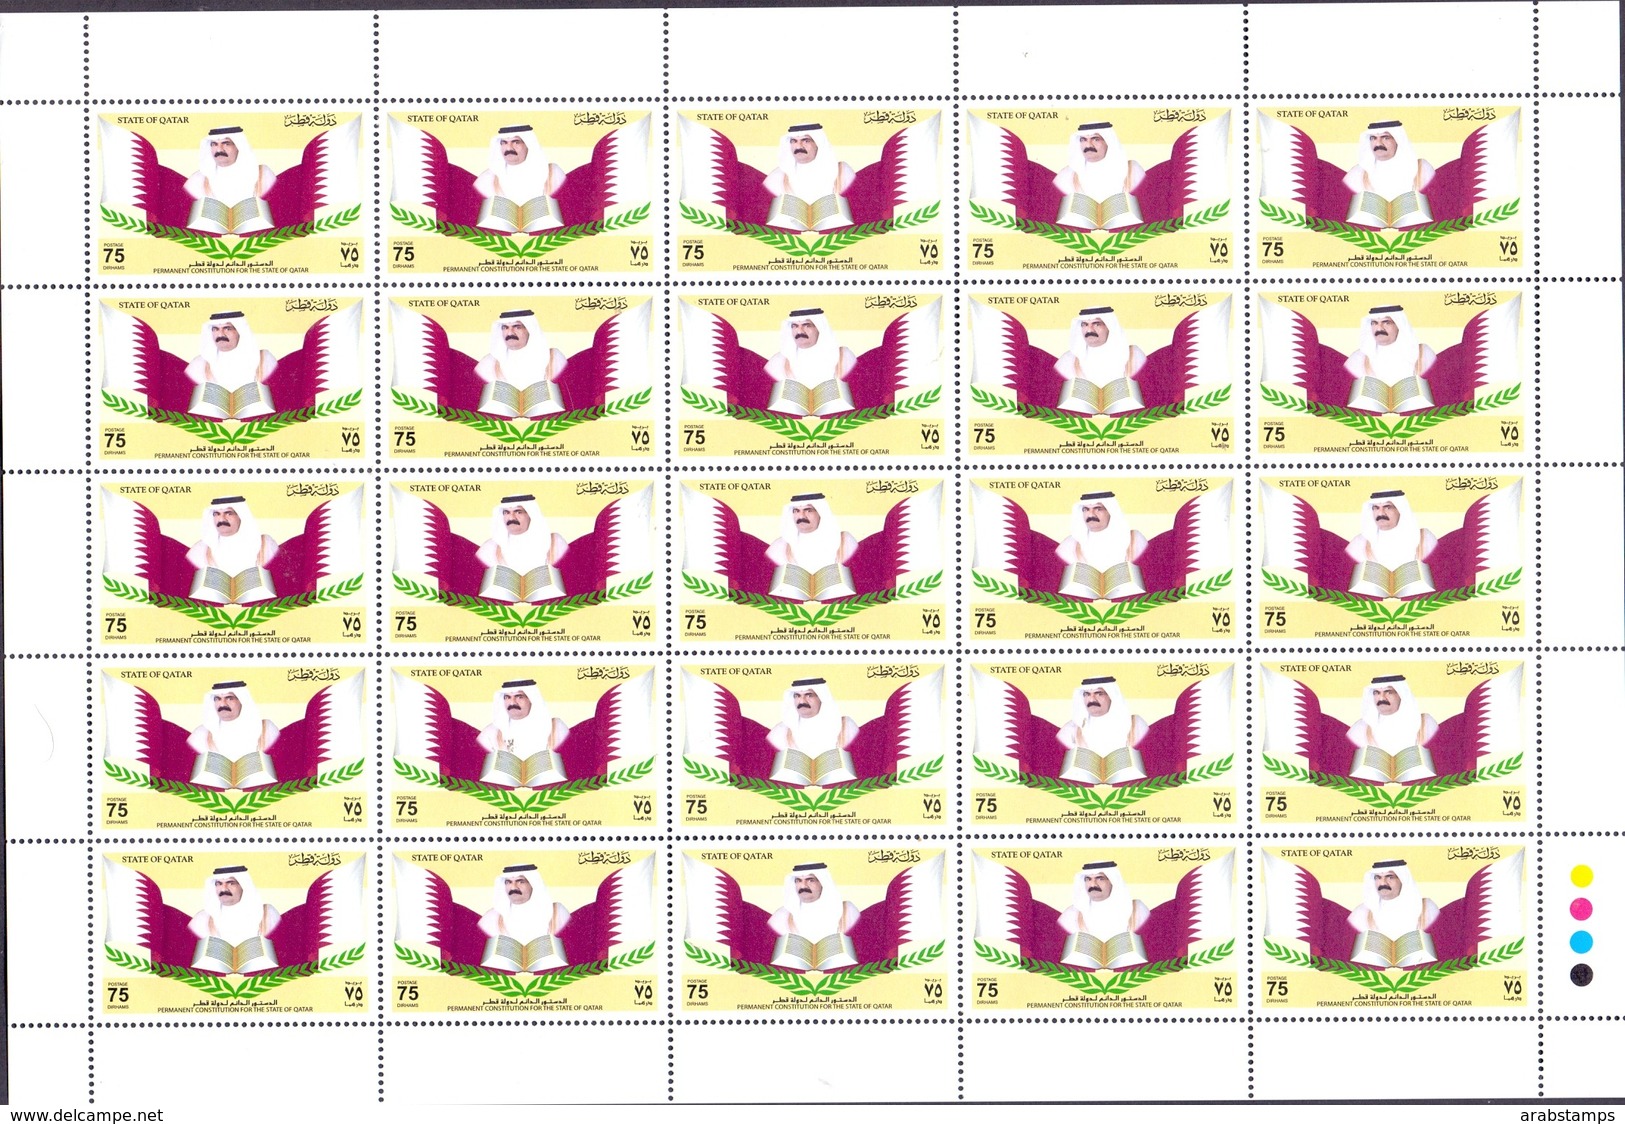 2004 QATAR Permanent Constitution Of The State 1 Values Complete Sheet 25 Stamps MNH - Qatar